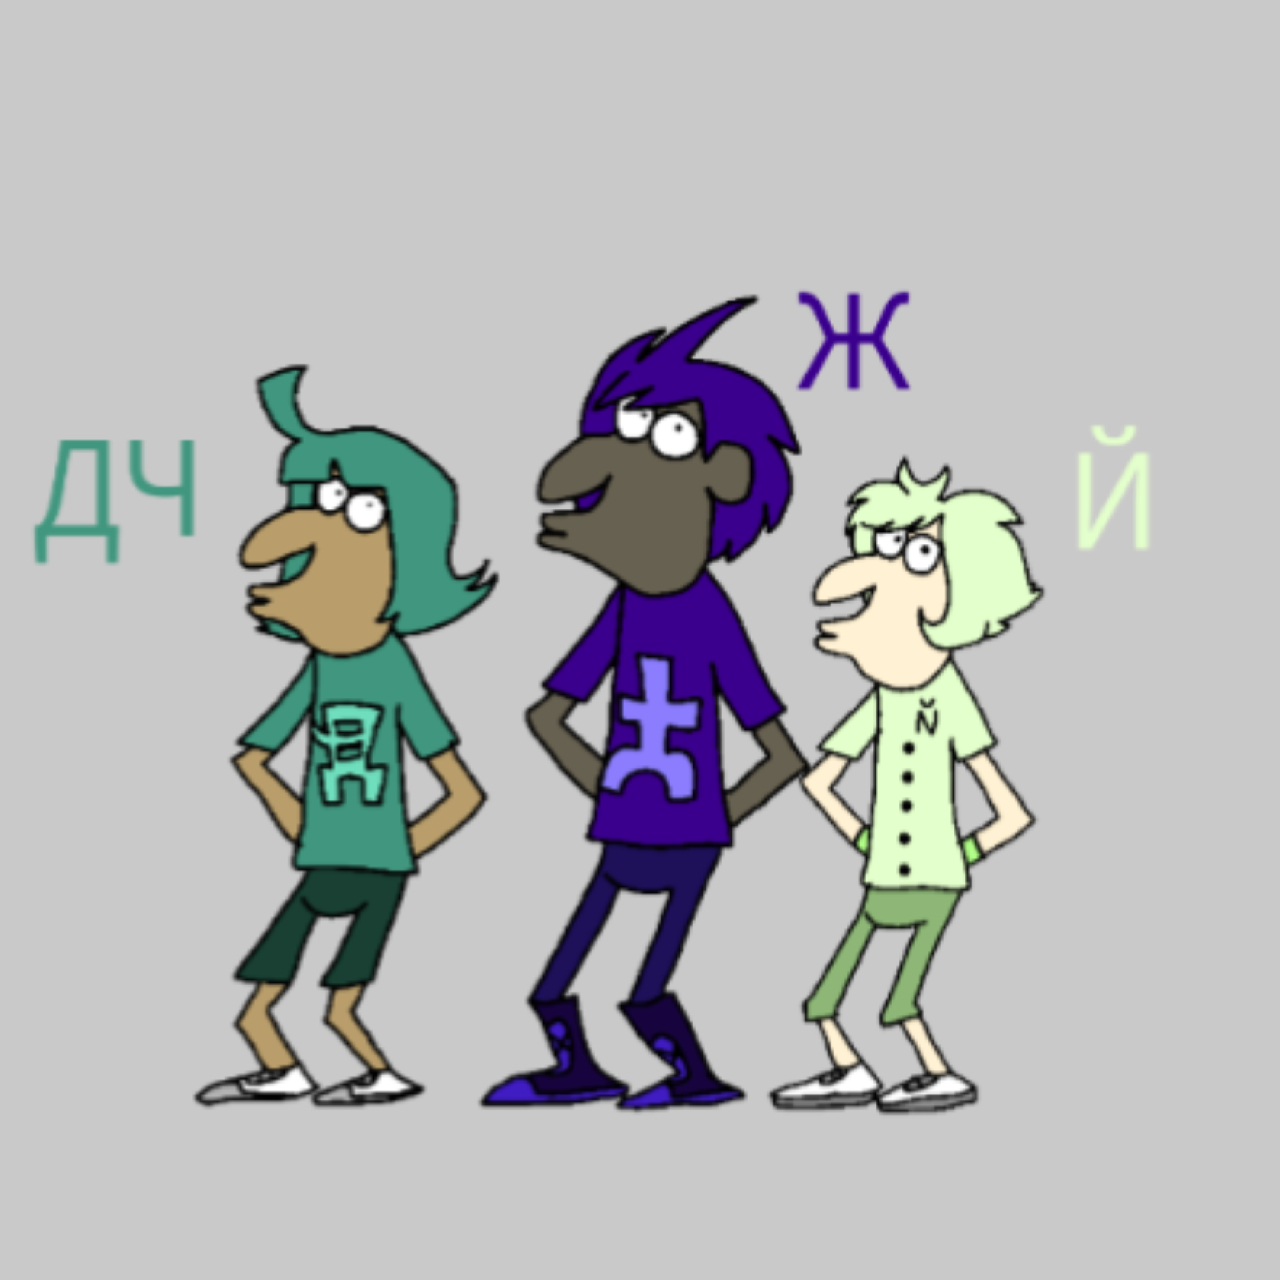 Alphabet Lore Humans (Guess what they look like)